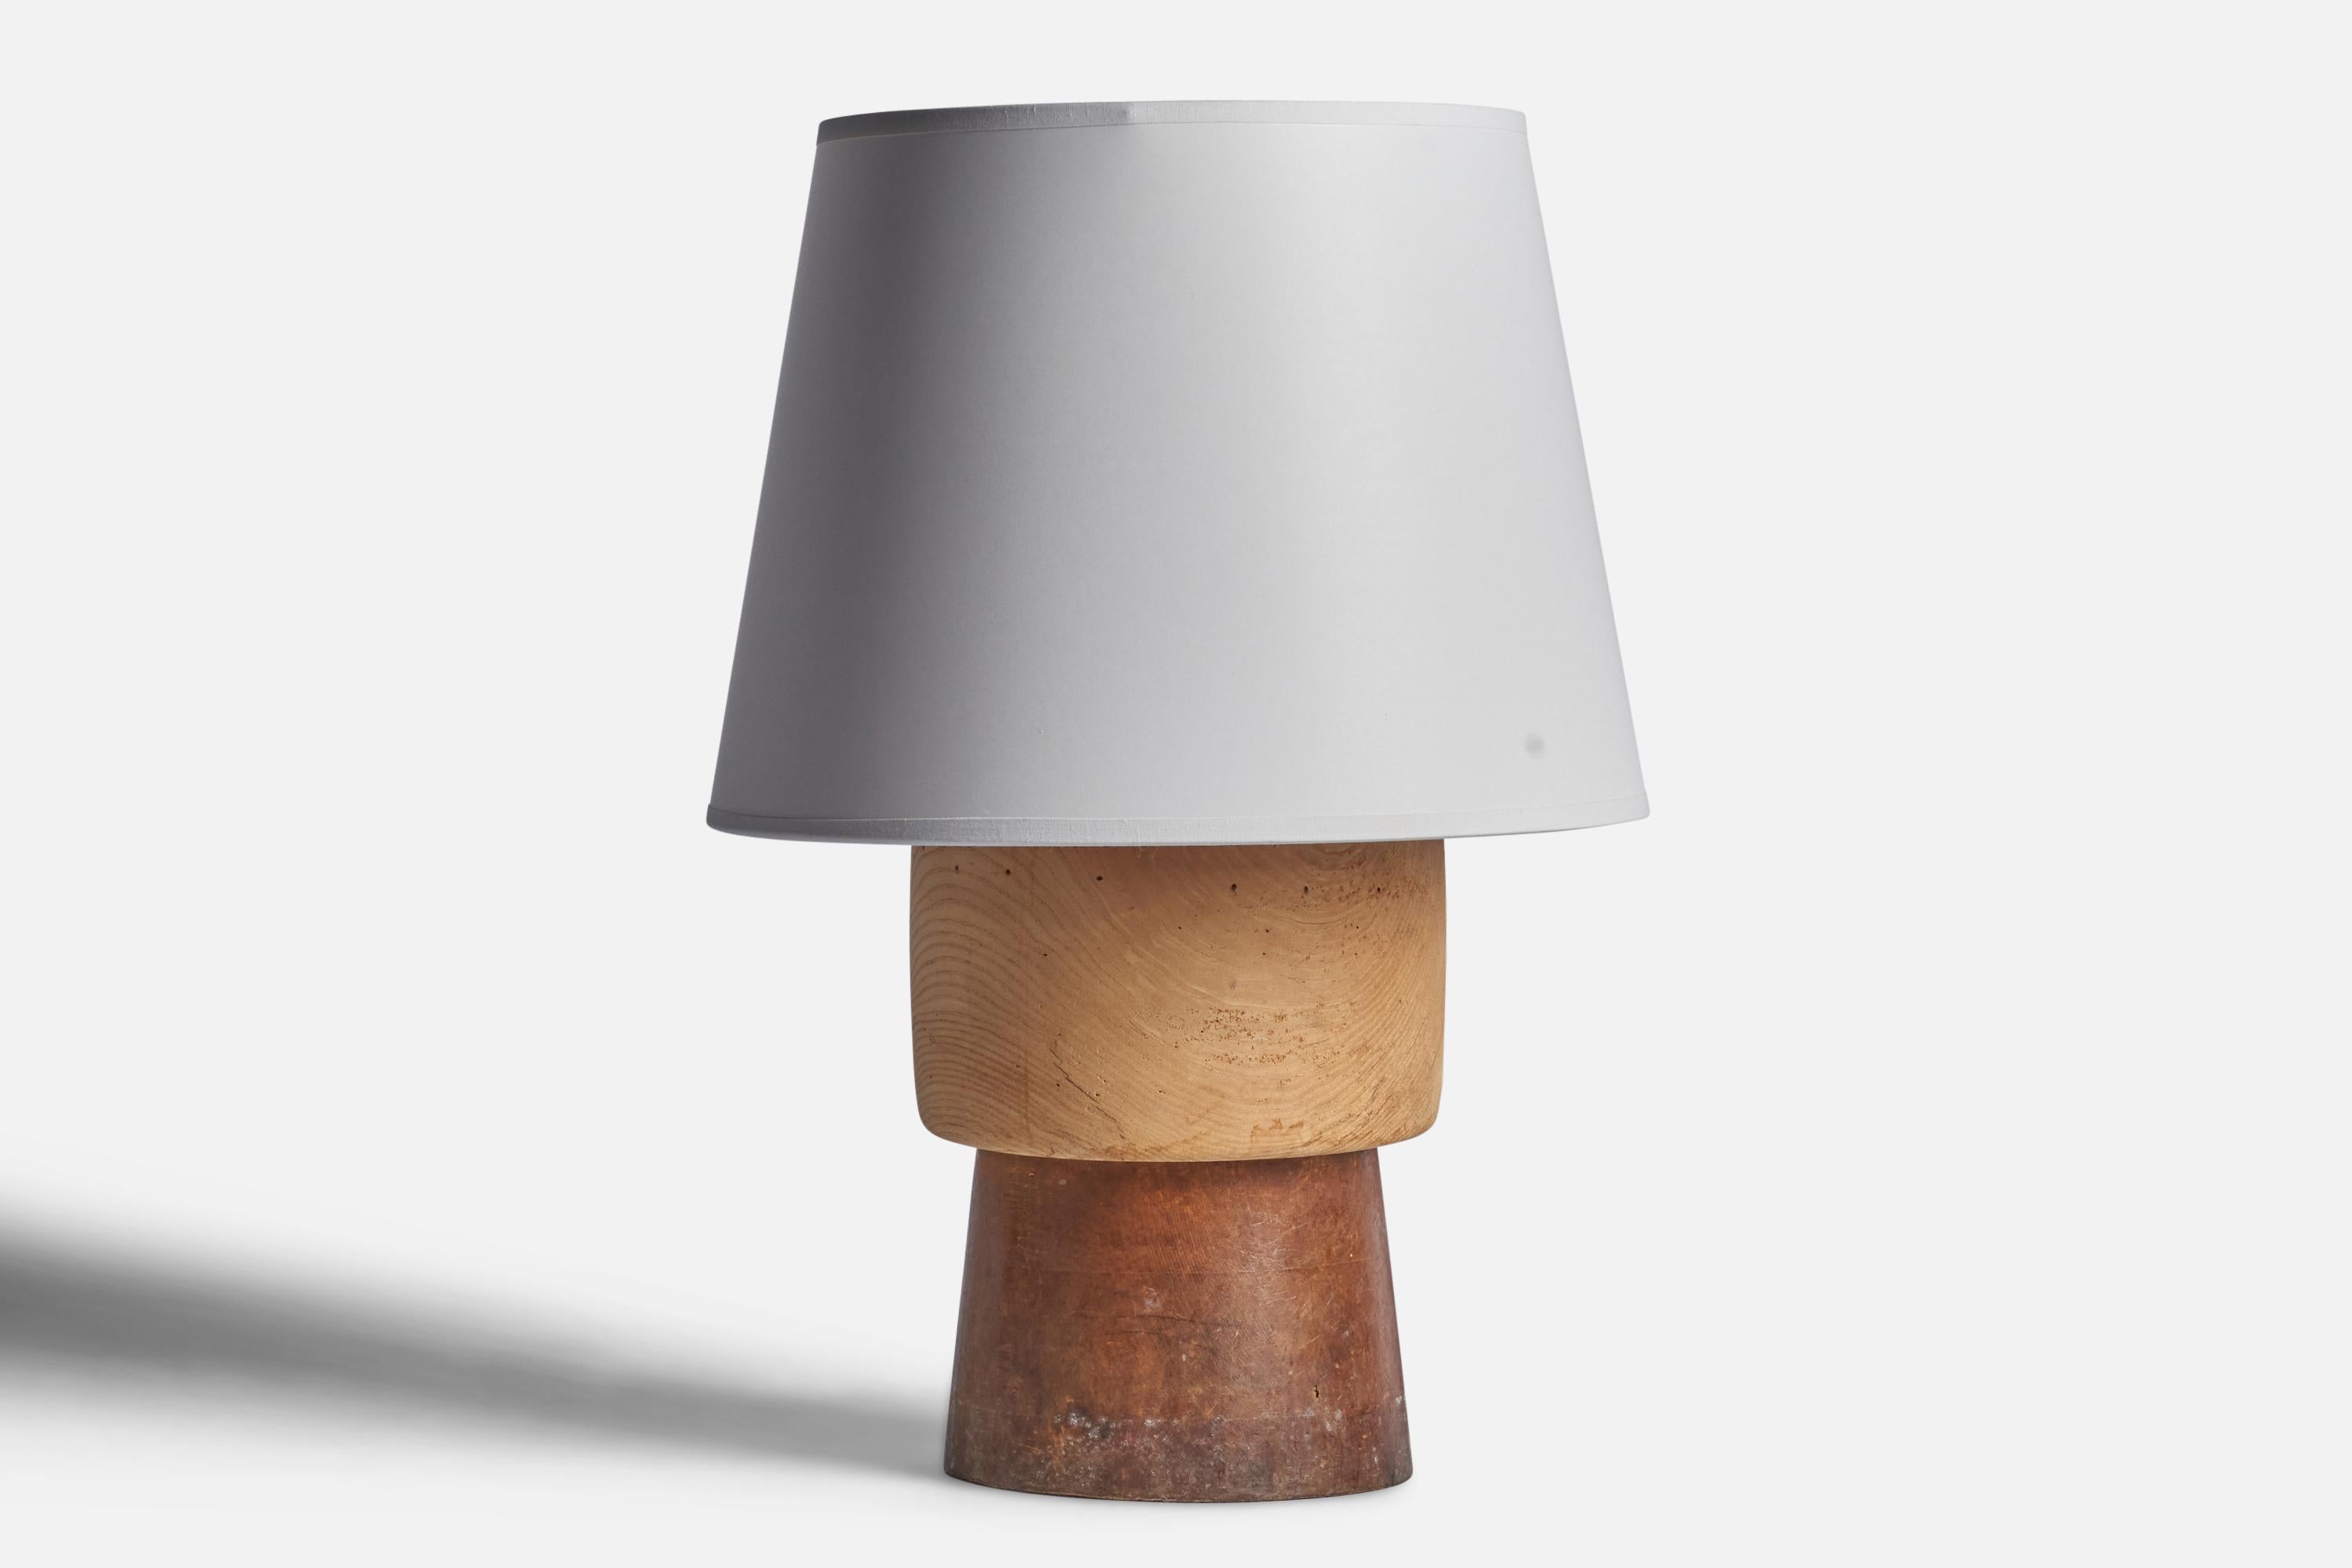 A wood table lamp designed and produced in Sweden, 1940s.

Dimensions of Lamp (inches): 12” H x 7” Diameter
Dimensions of Shade (inches): 8.75” Top Diameter x 12” Bottom Diameter x 9” H 
Dimensions of Lamp with Shade (inches): 18” H x 12”